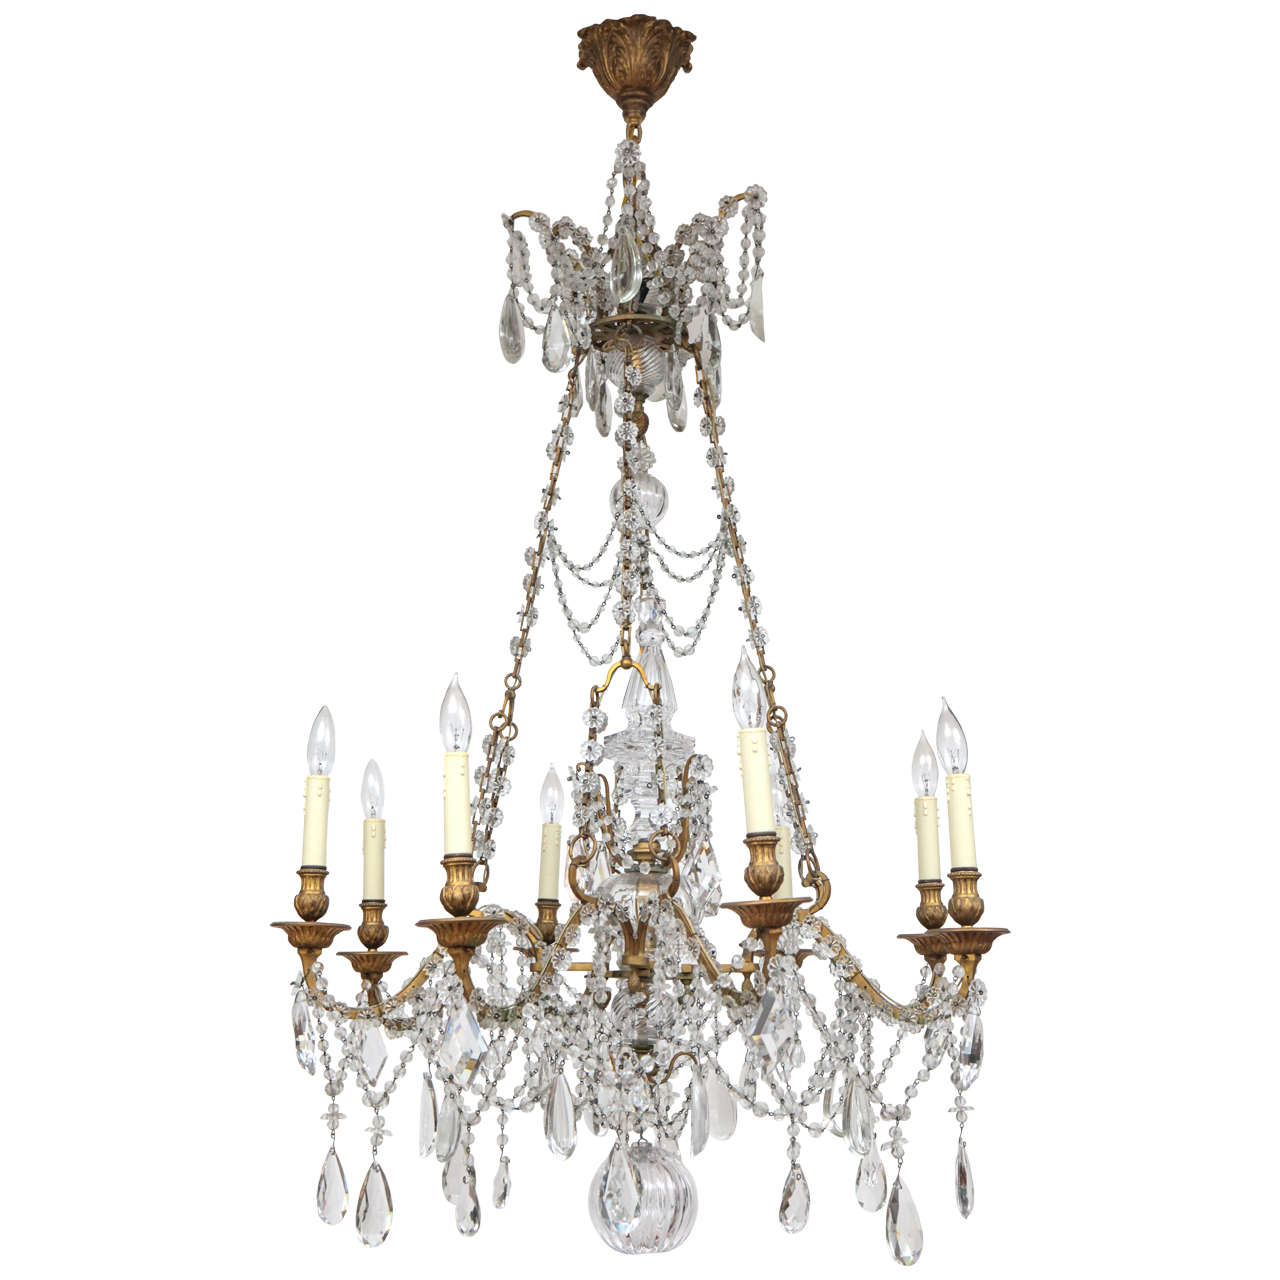 19th Century French Doré Bronze and Crystal Chandelier